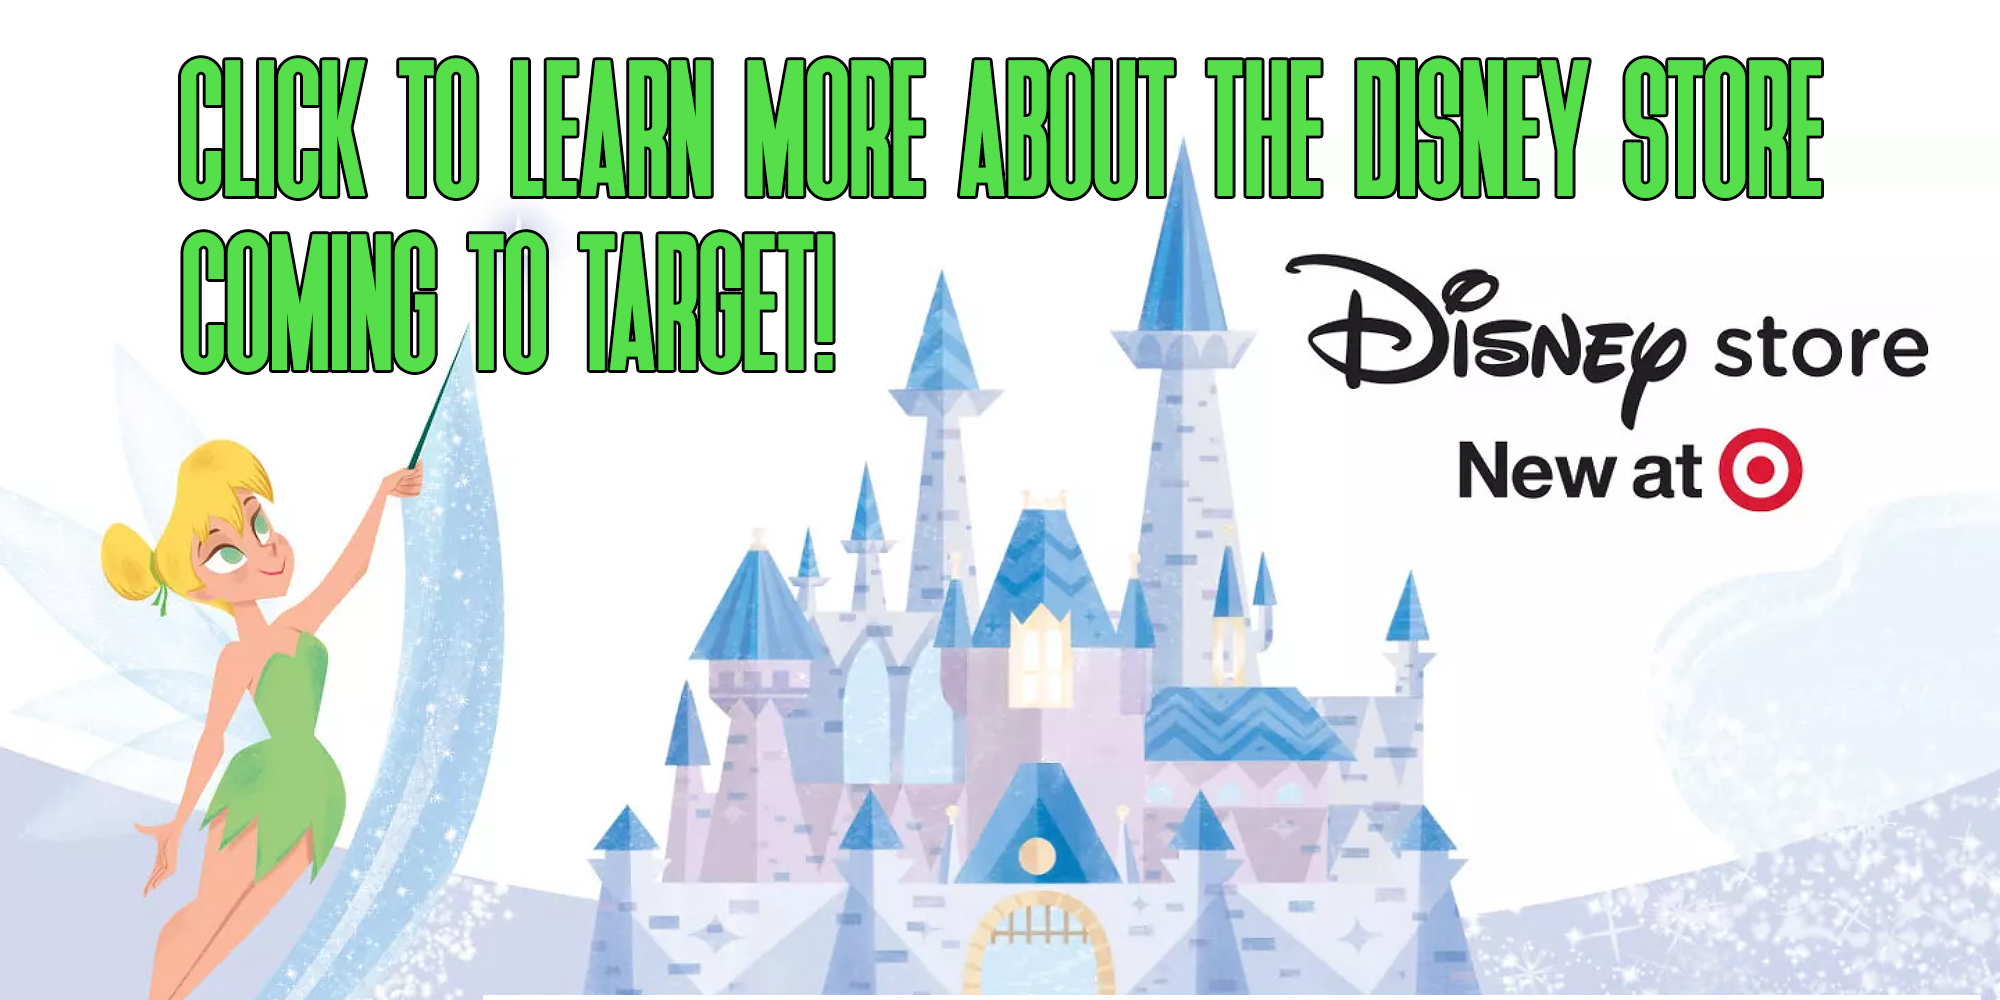 Learn More About The Disney Store Coming To Target!